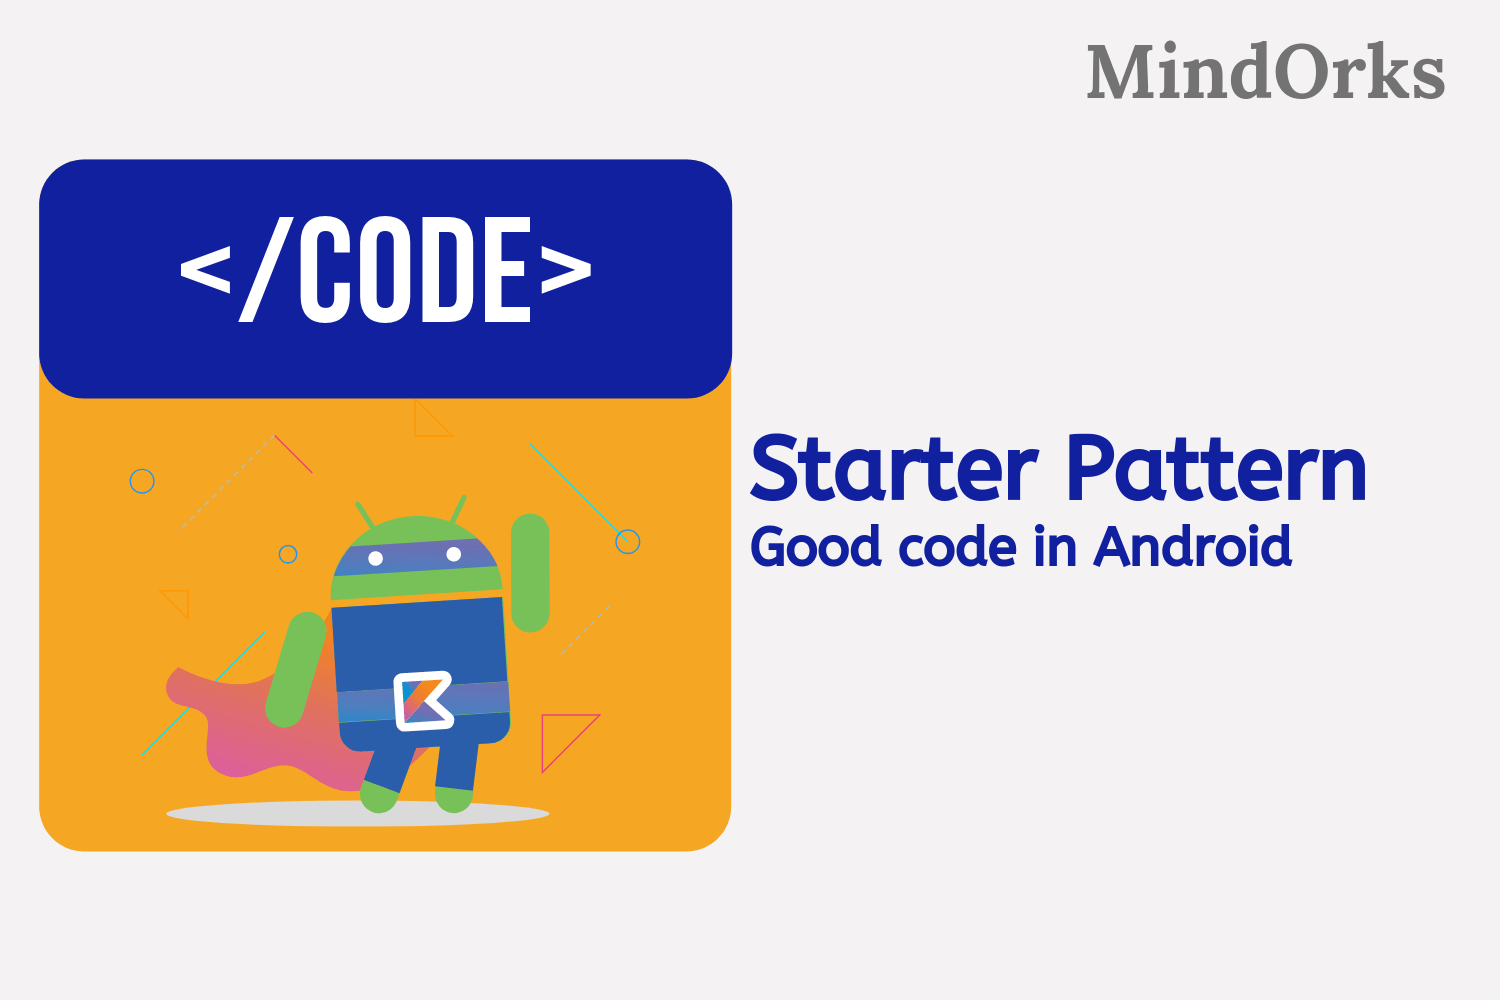 Learn to write good code in Android: Starter Pattern